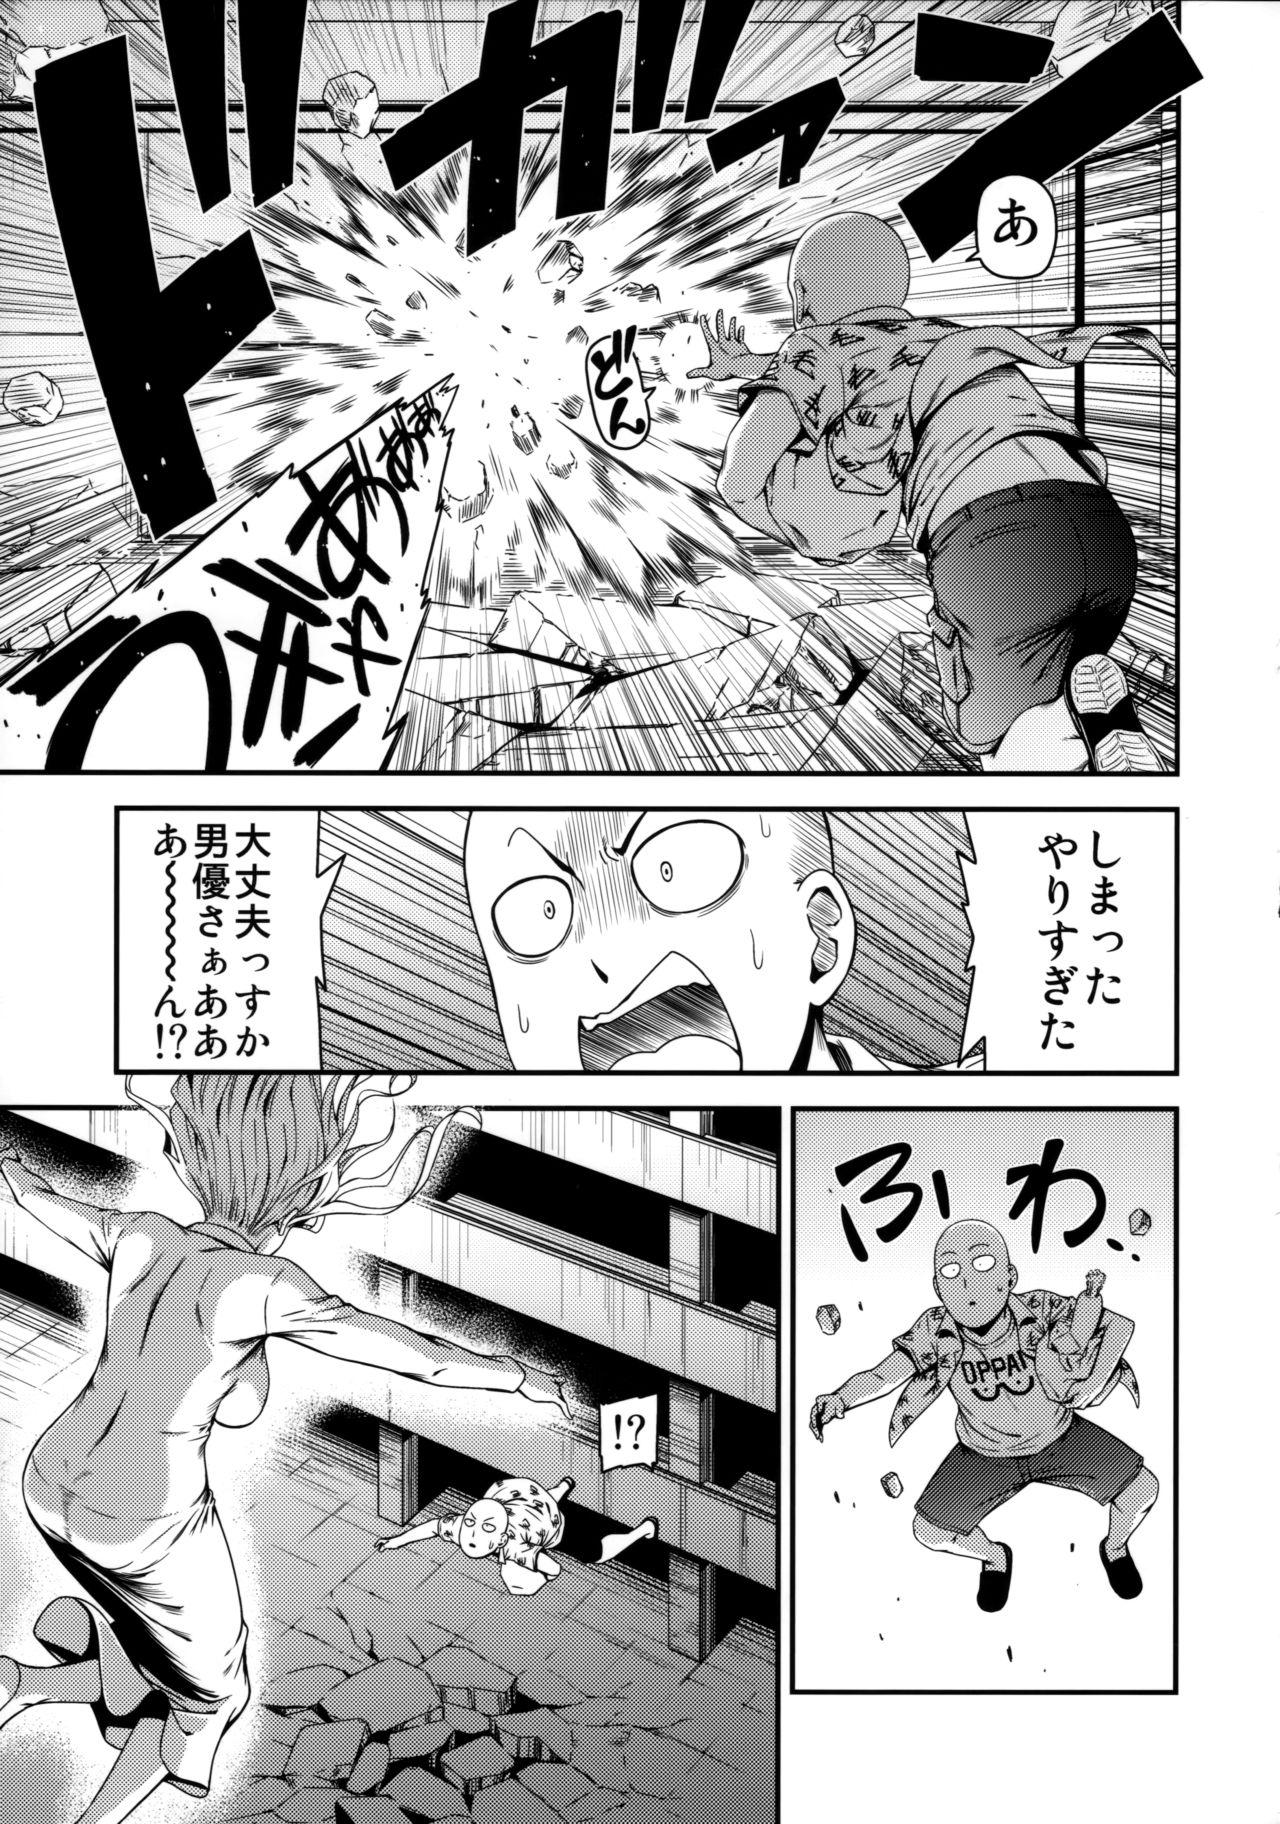 Tetas ONE-HURRICANE 3.5 - One punch man Tanned - Page 10